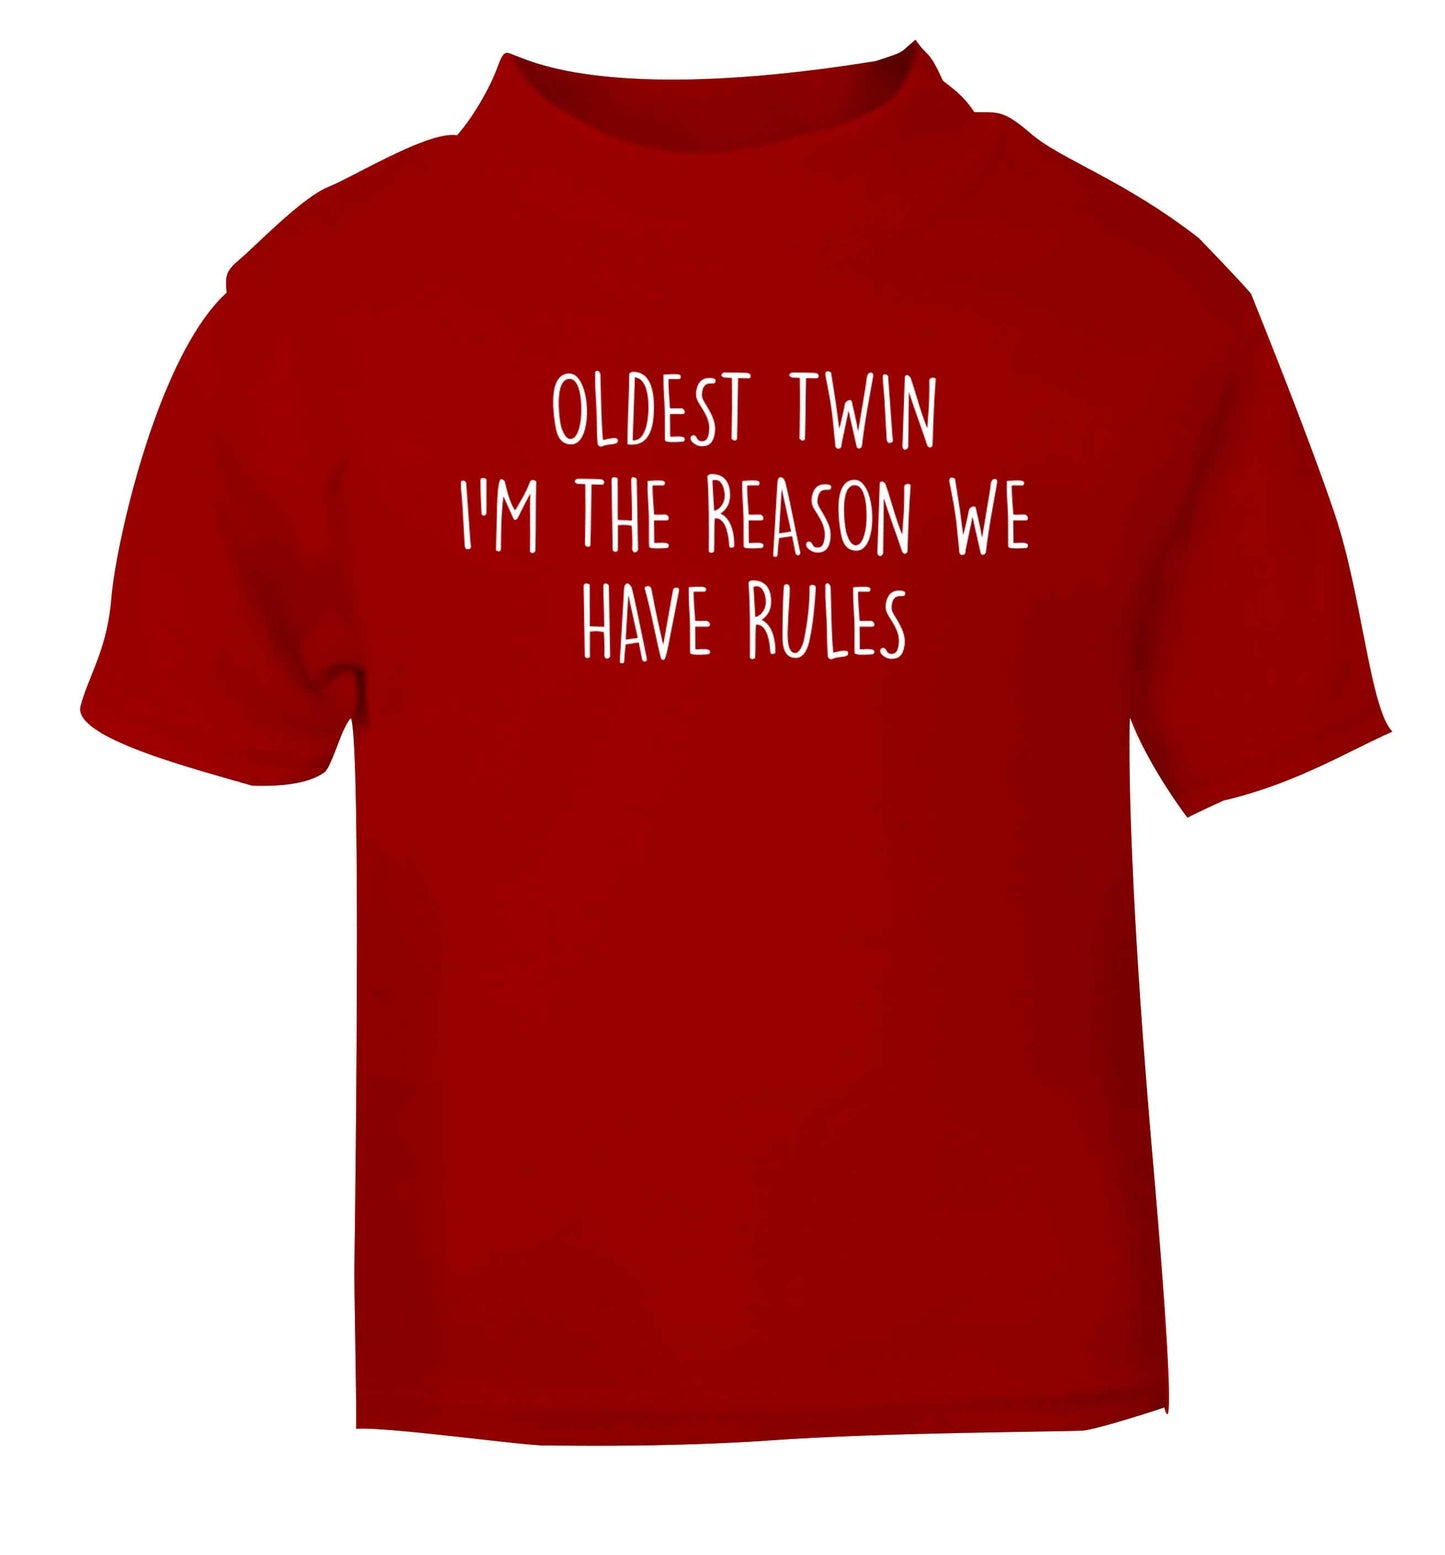 Oldest twin I'm the reason we have rules red baby toddler Tshirt 2 Years